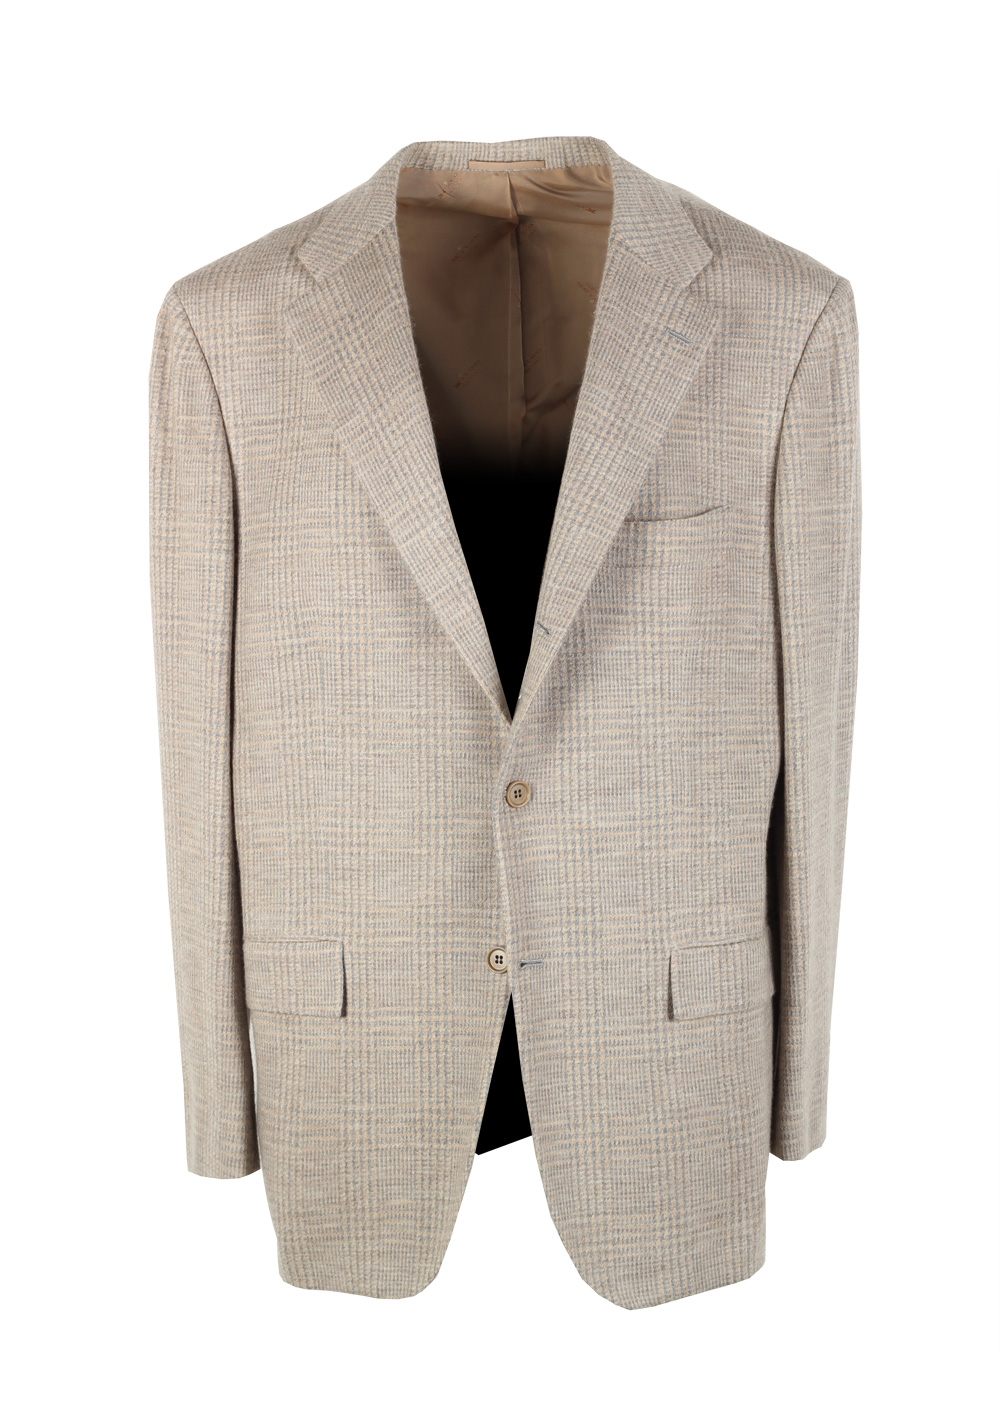 Kiton Checked Gray Sport Coat Size 56 / 46R U.S. In Cashmere Blend ...